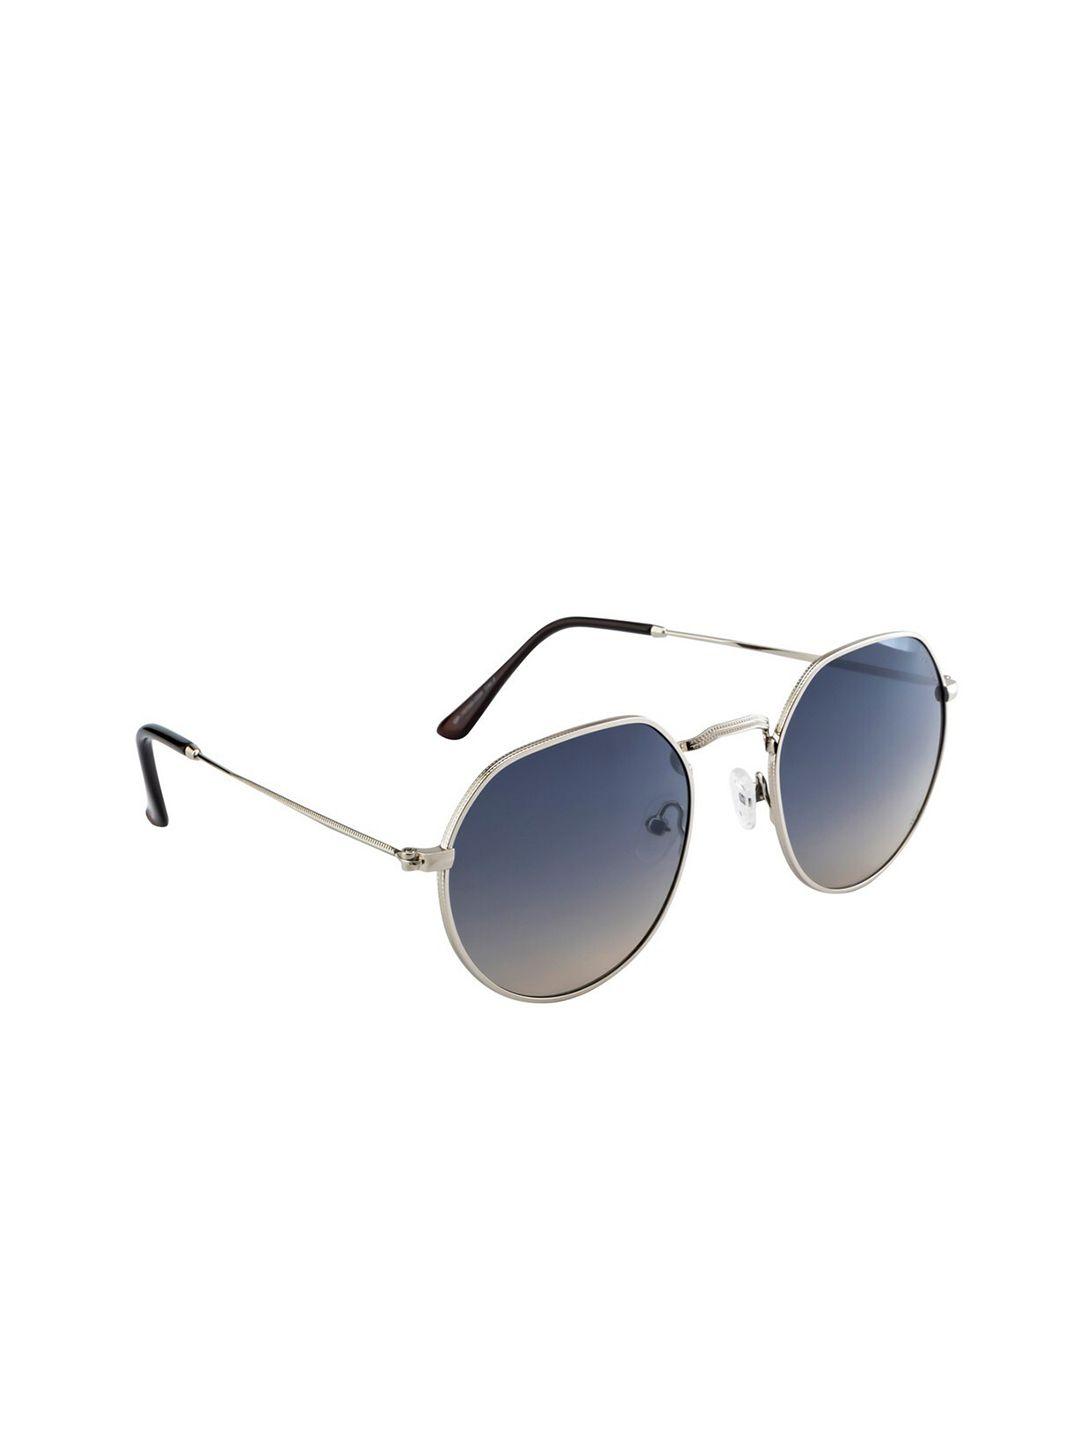 opium-women-grey-lens-&-silver-toned-round-sunglasses-with-uv-protected-lens